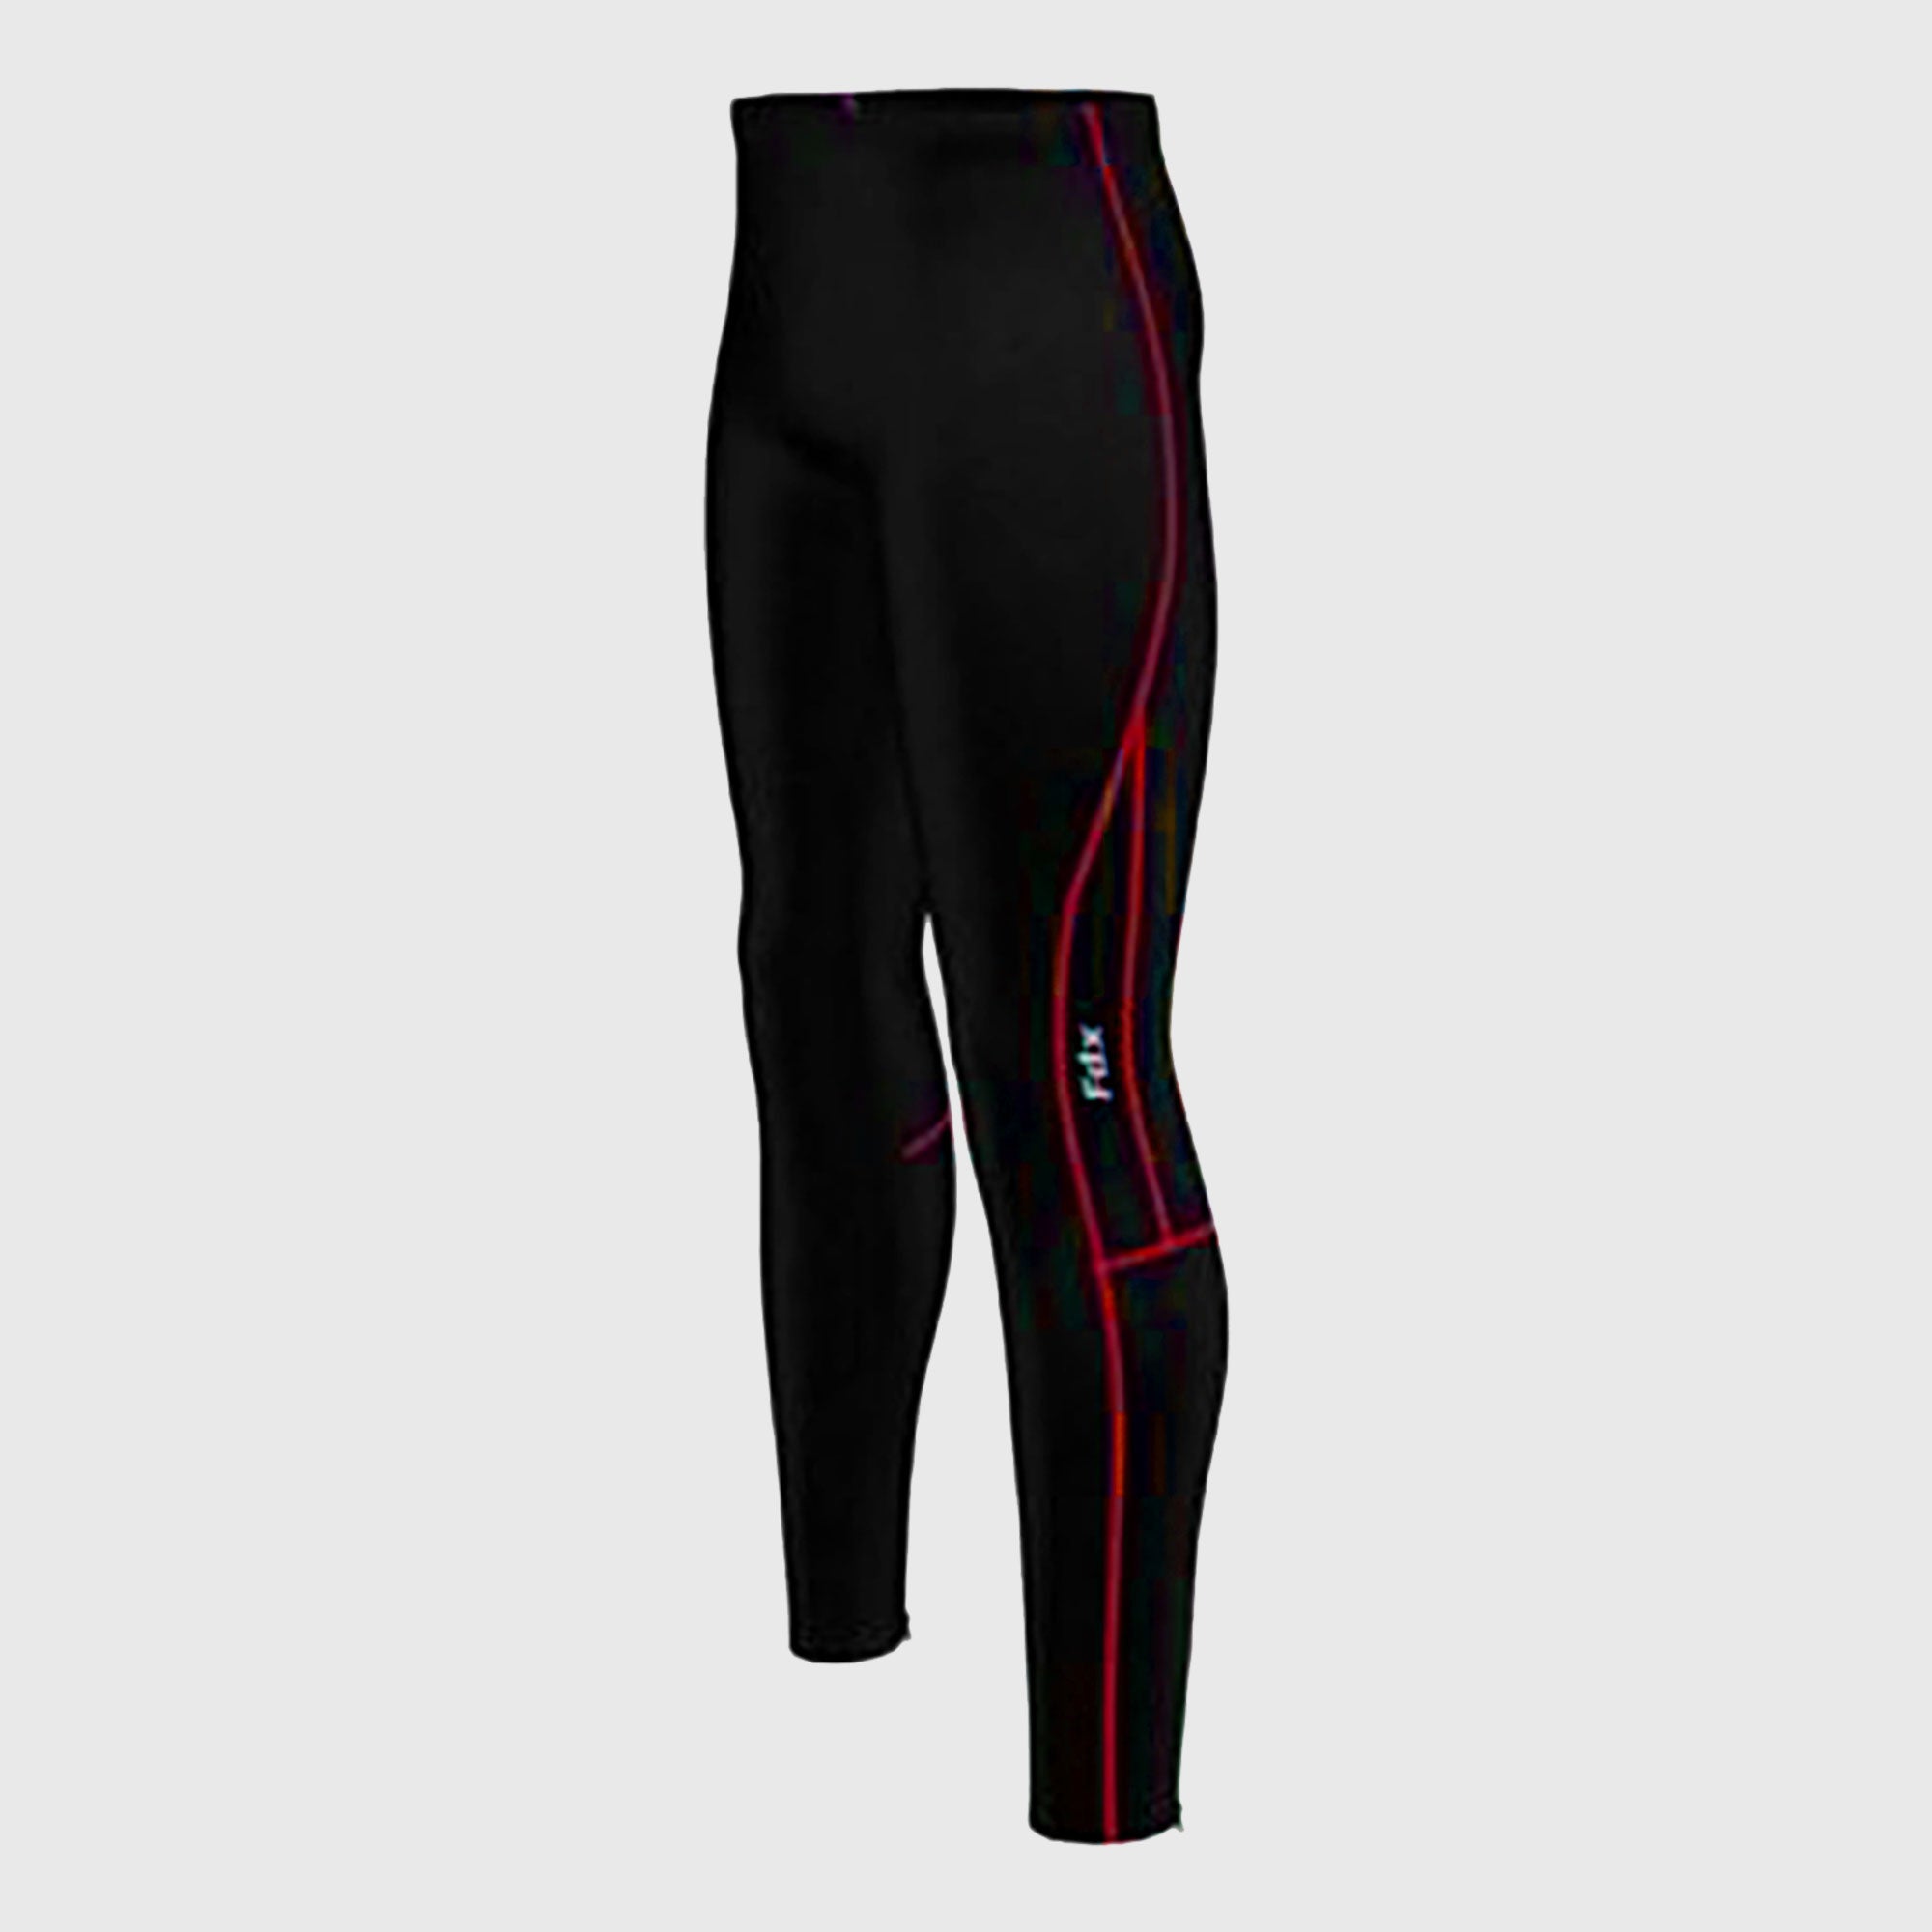 Fdx Heatchaser Men's Compression Winter Cycling Tights Black, Red & Blue